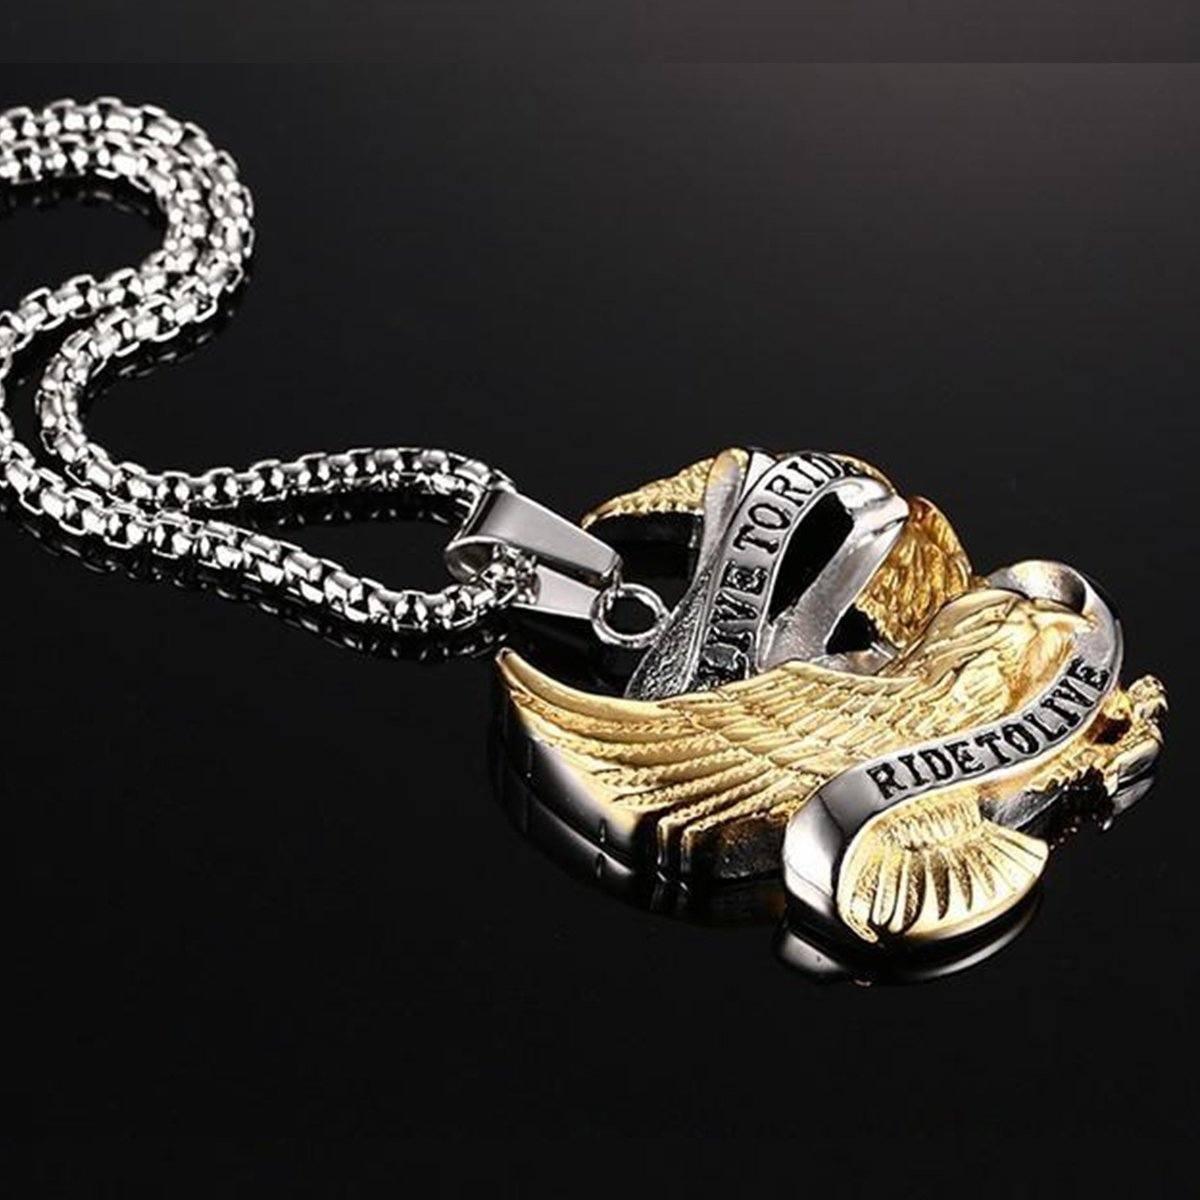 A Bikers Live To Ride, Ride To Live Necklace with an eagle pendant on it.